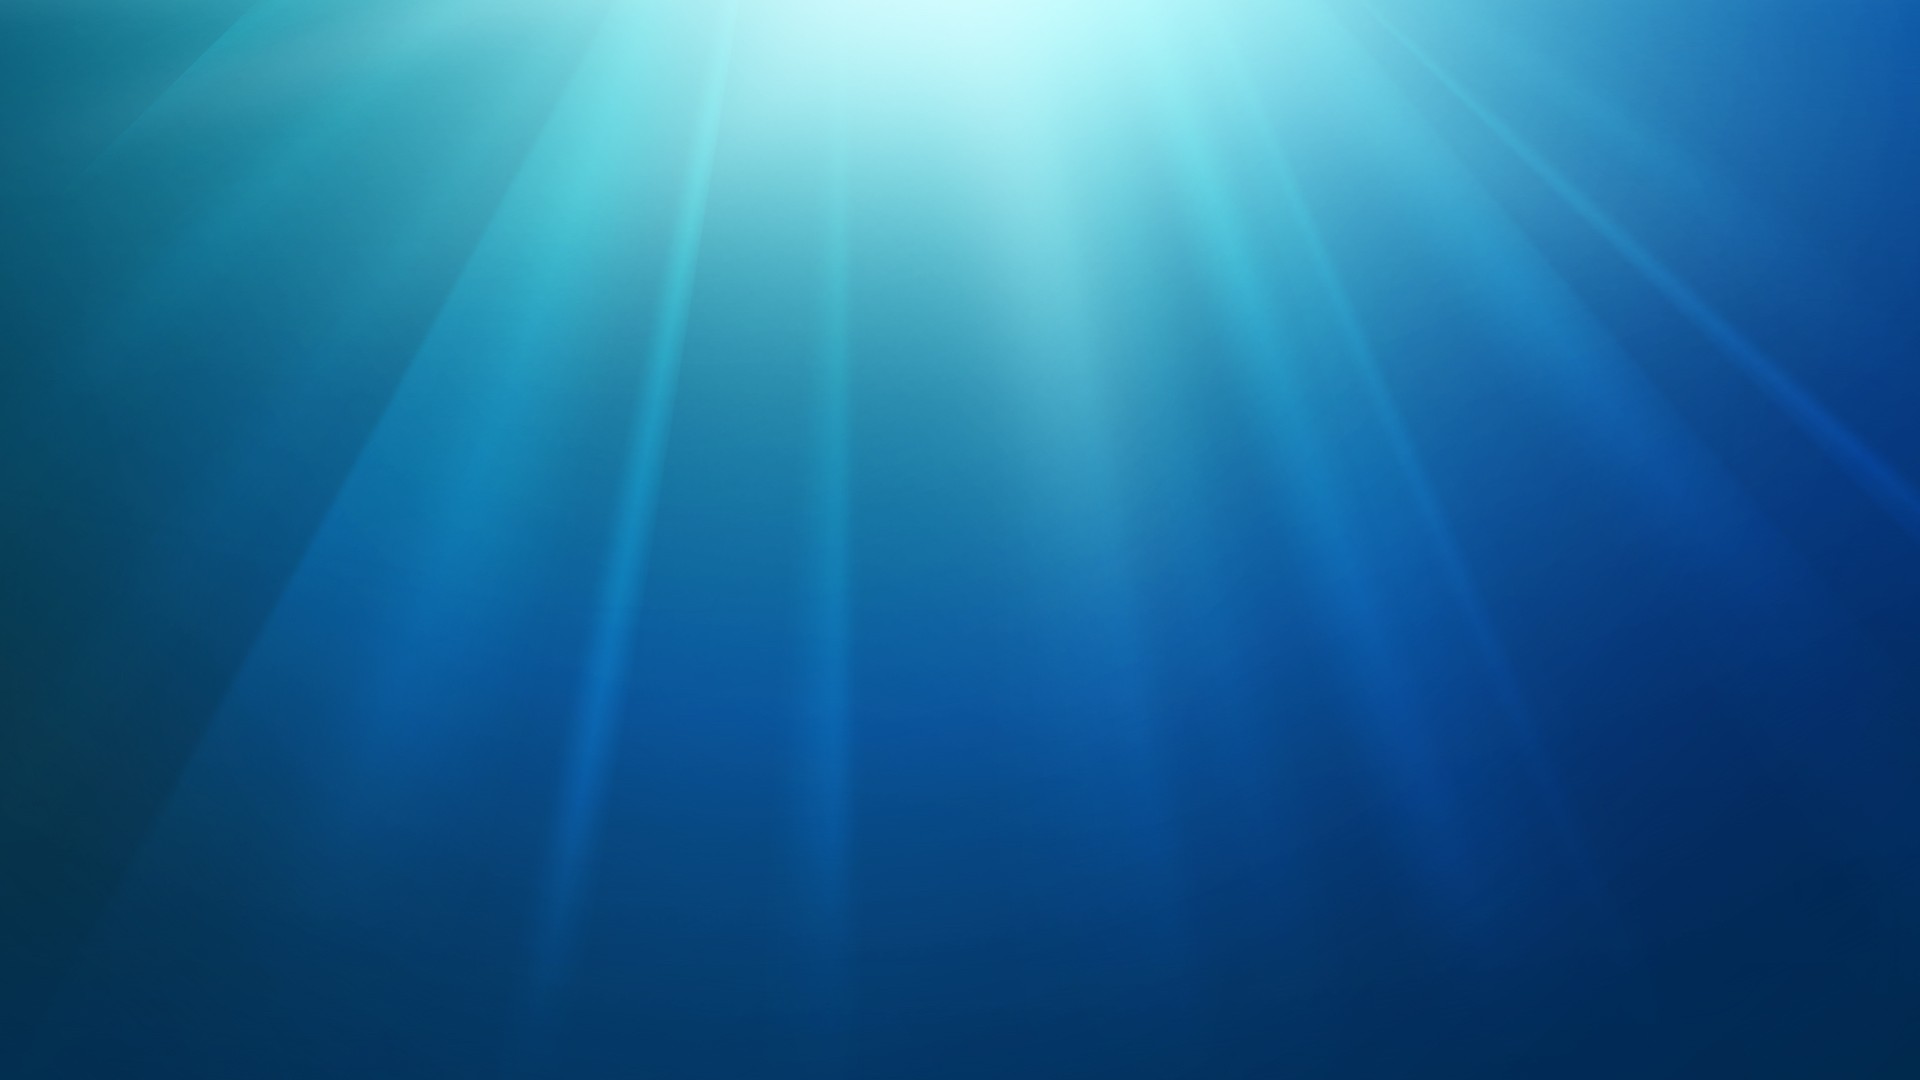 Rays Of Light Under Water Wallpaper Wide HD